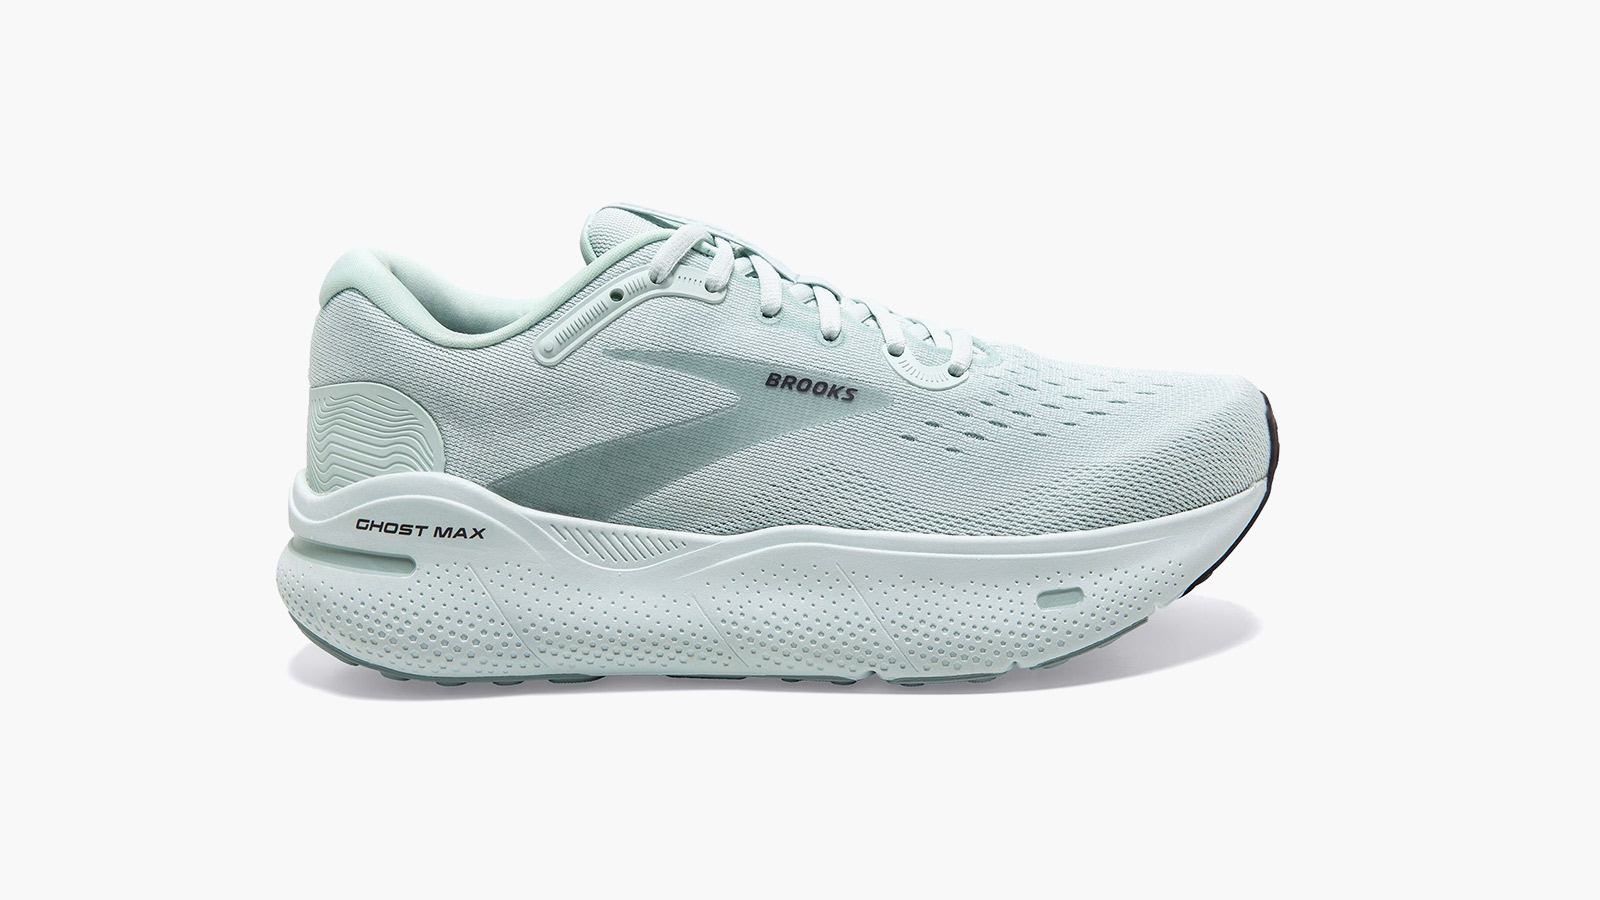 a light turquoise men's running shoe from Brooks